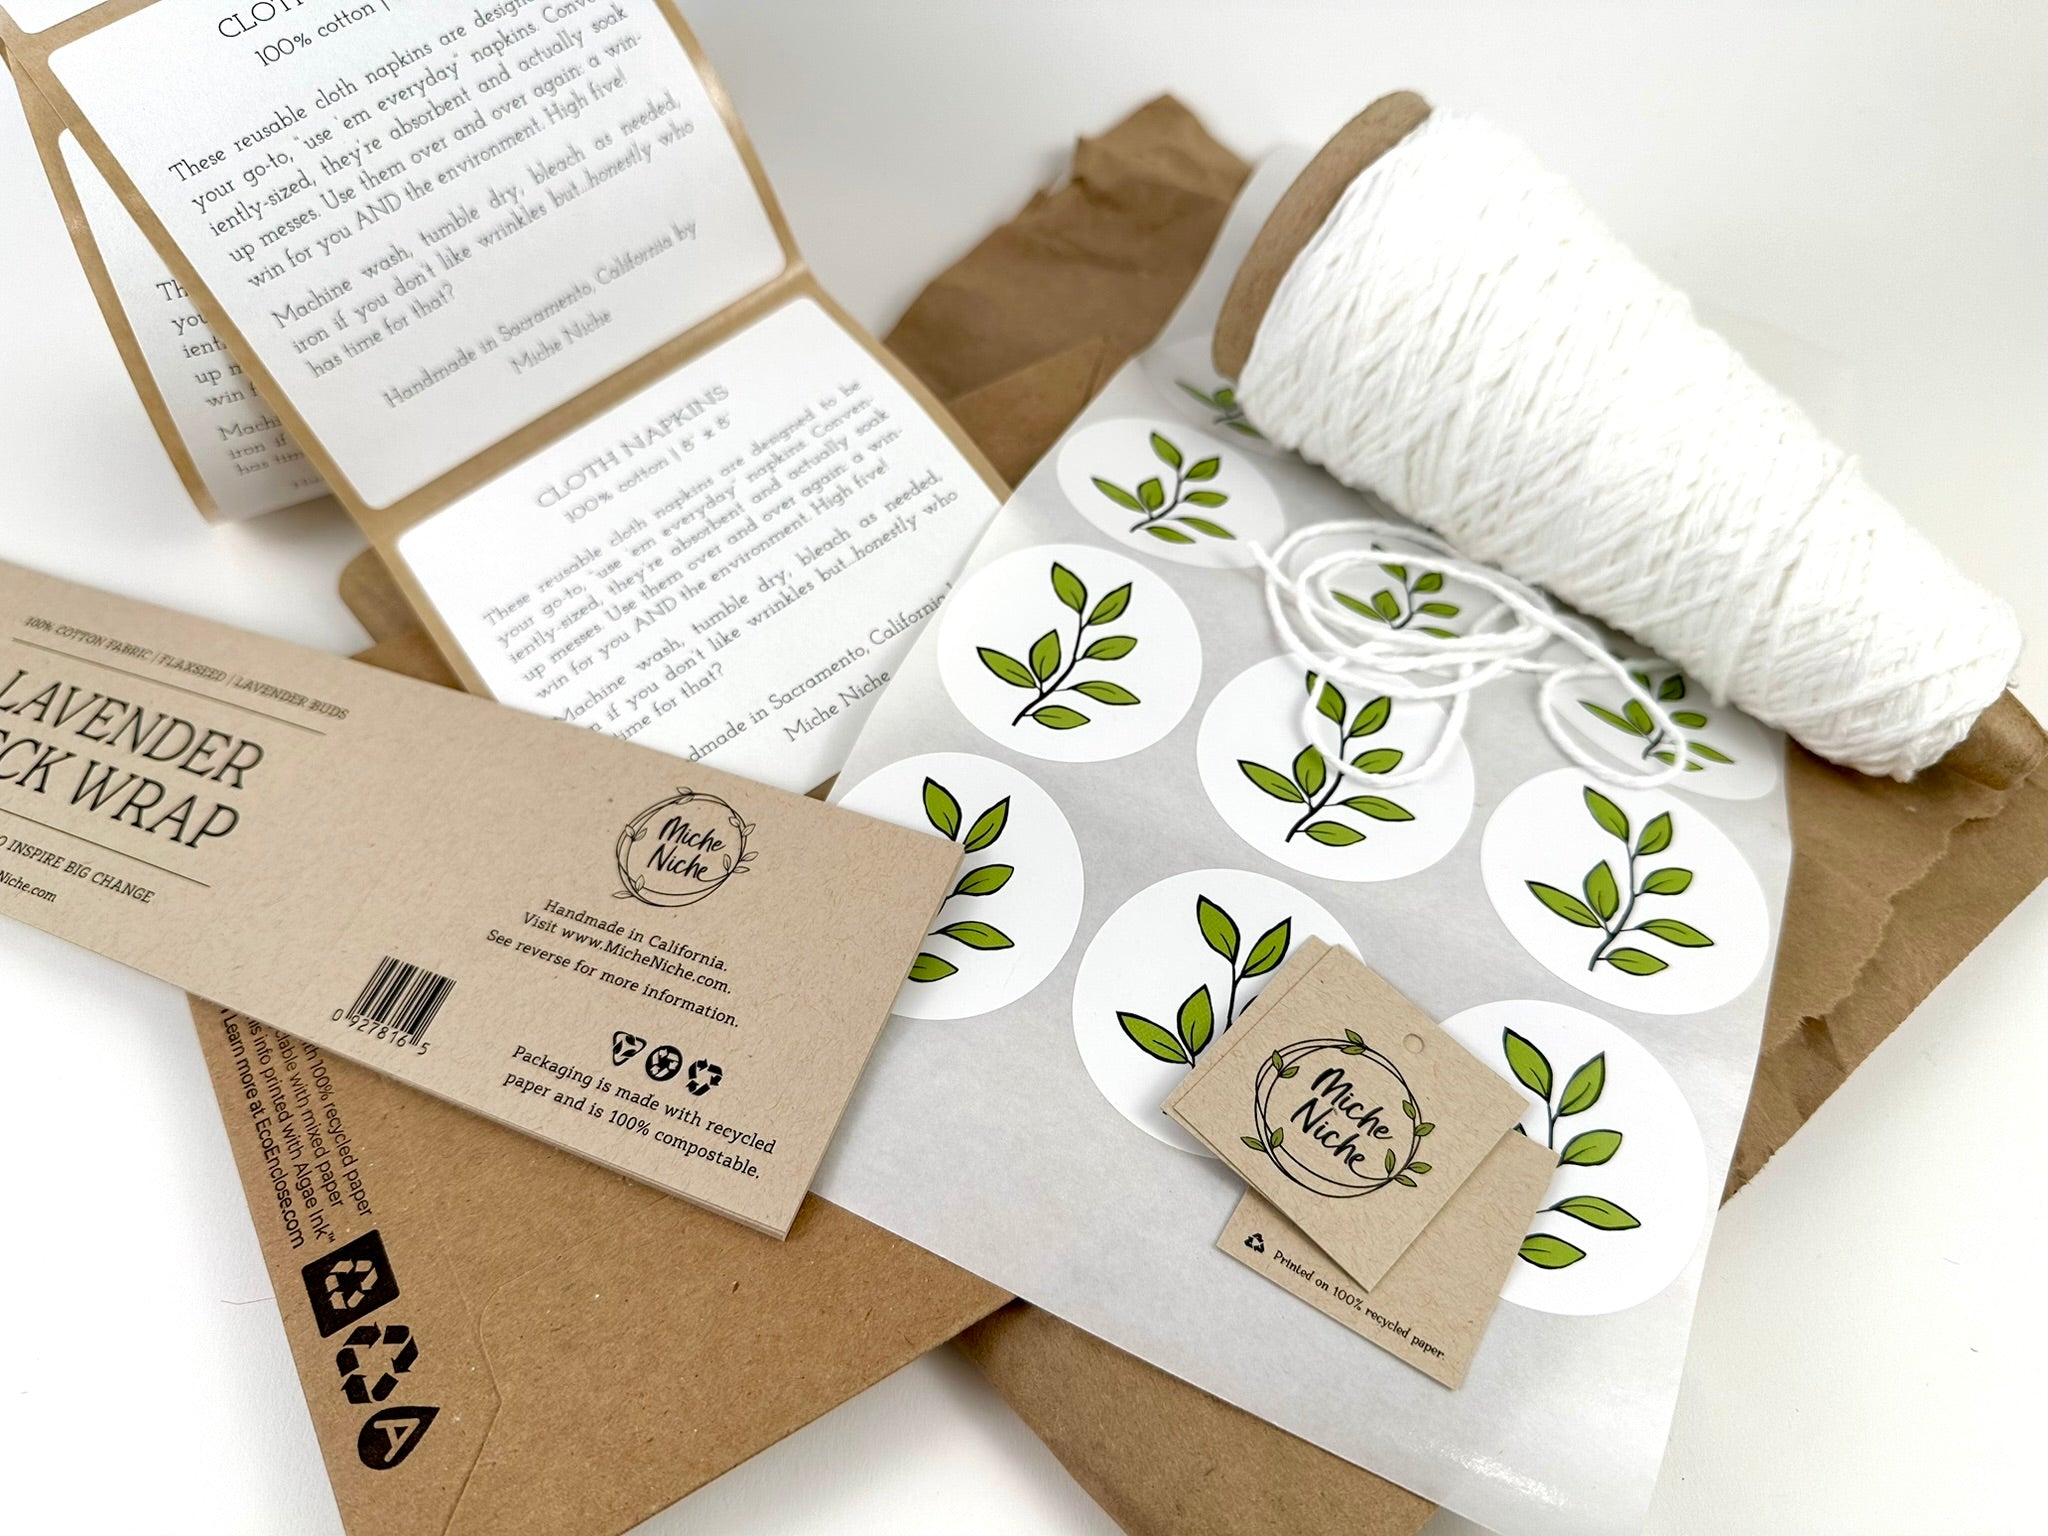 Eco-friendly packaging supplies